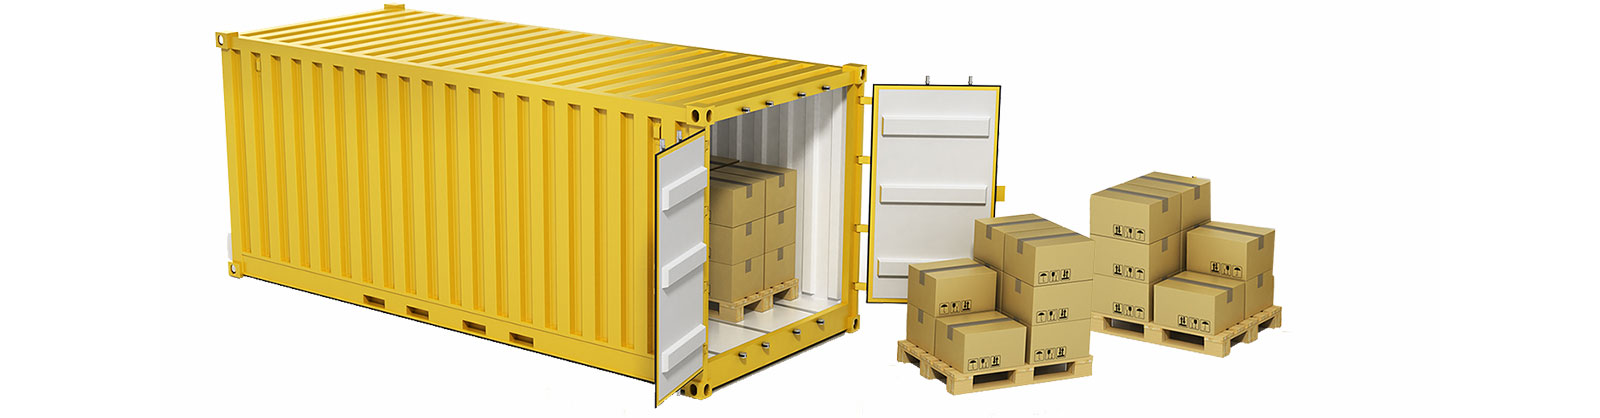 affordable 20' to 40' portable storage containers to businesses and individuals in the Northeast Texas and Northwest Louisiana area. LVT facilities are located in Sulphur Springs, Paris, Longview, and Jacksonville Texas and in Shreveport Louisiana. 800-426-3631 903-885-6059